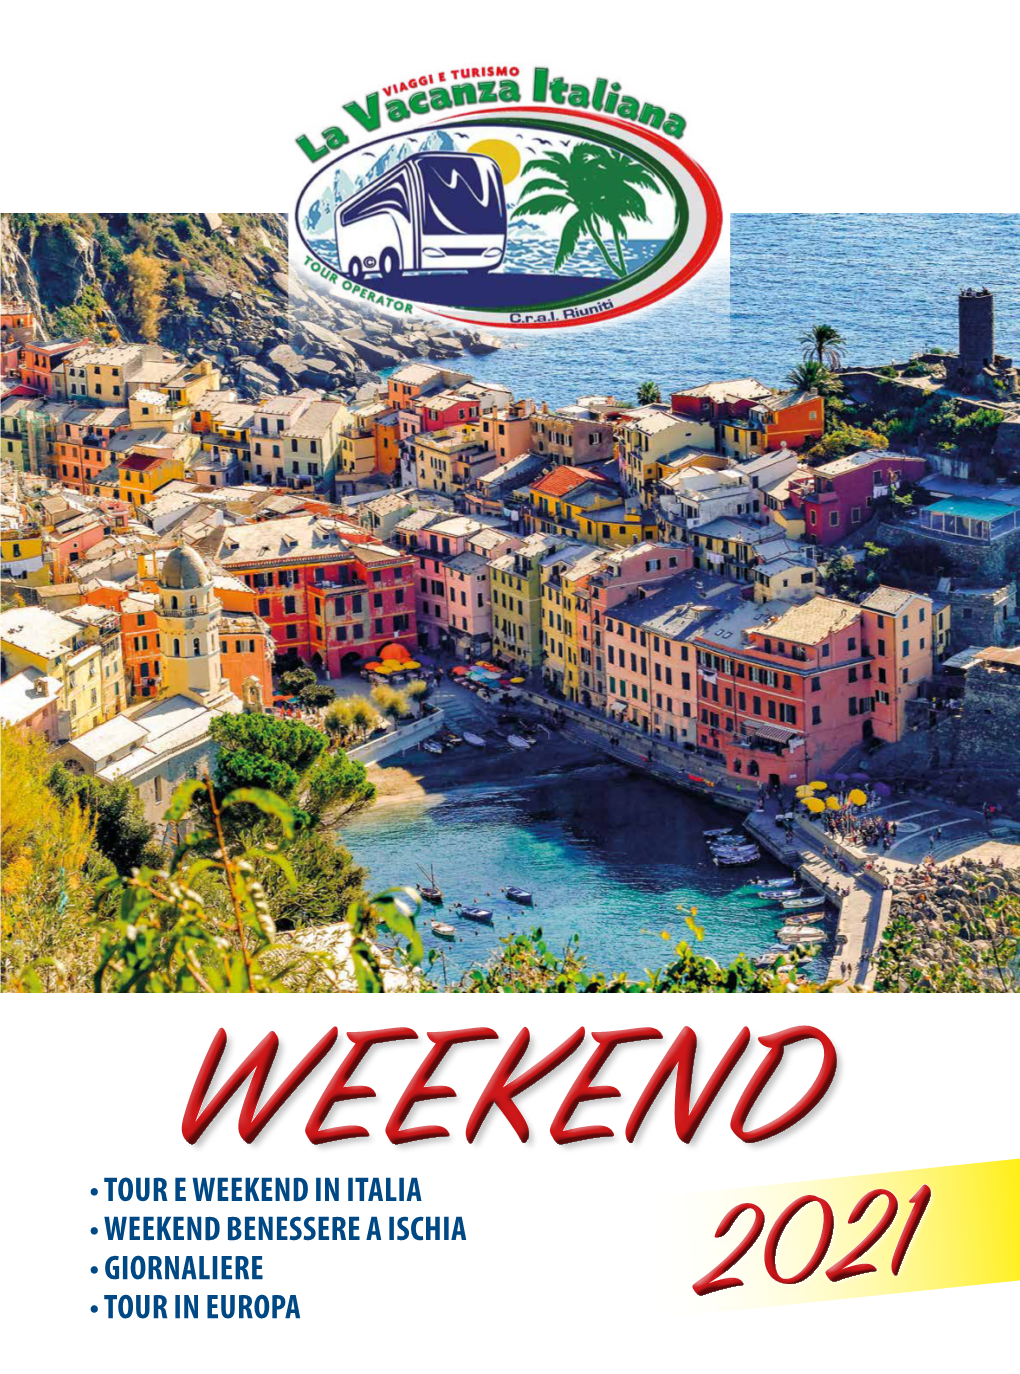 Tour E Weekend in Italia • Weekend Benessere a Ischia • Giornaliere